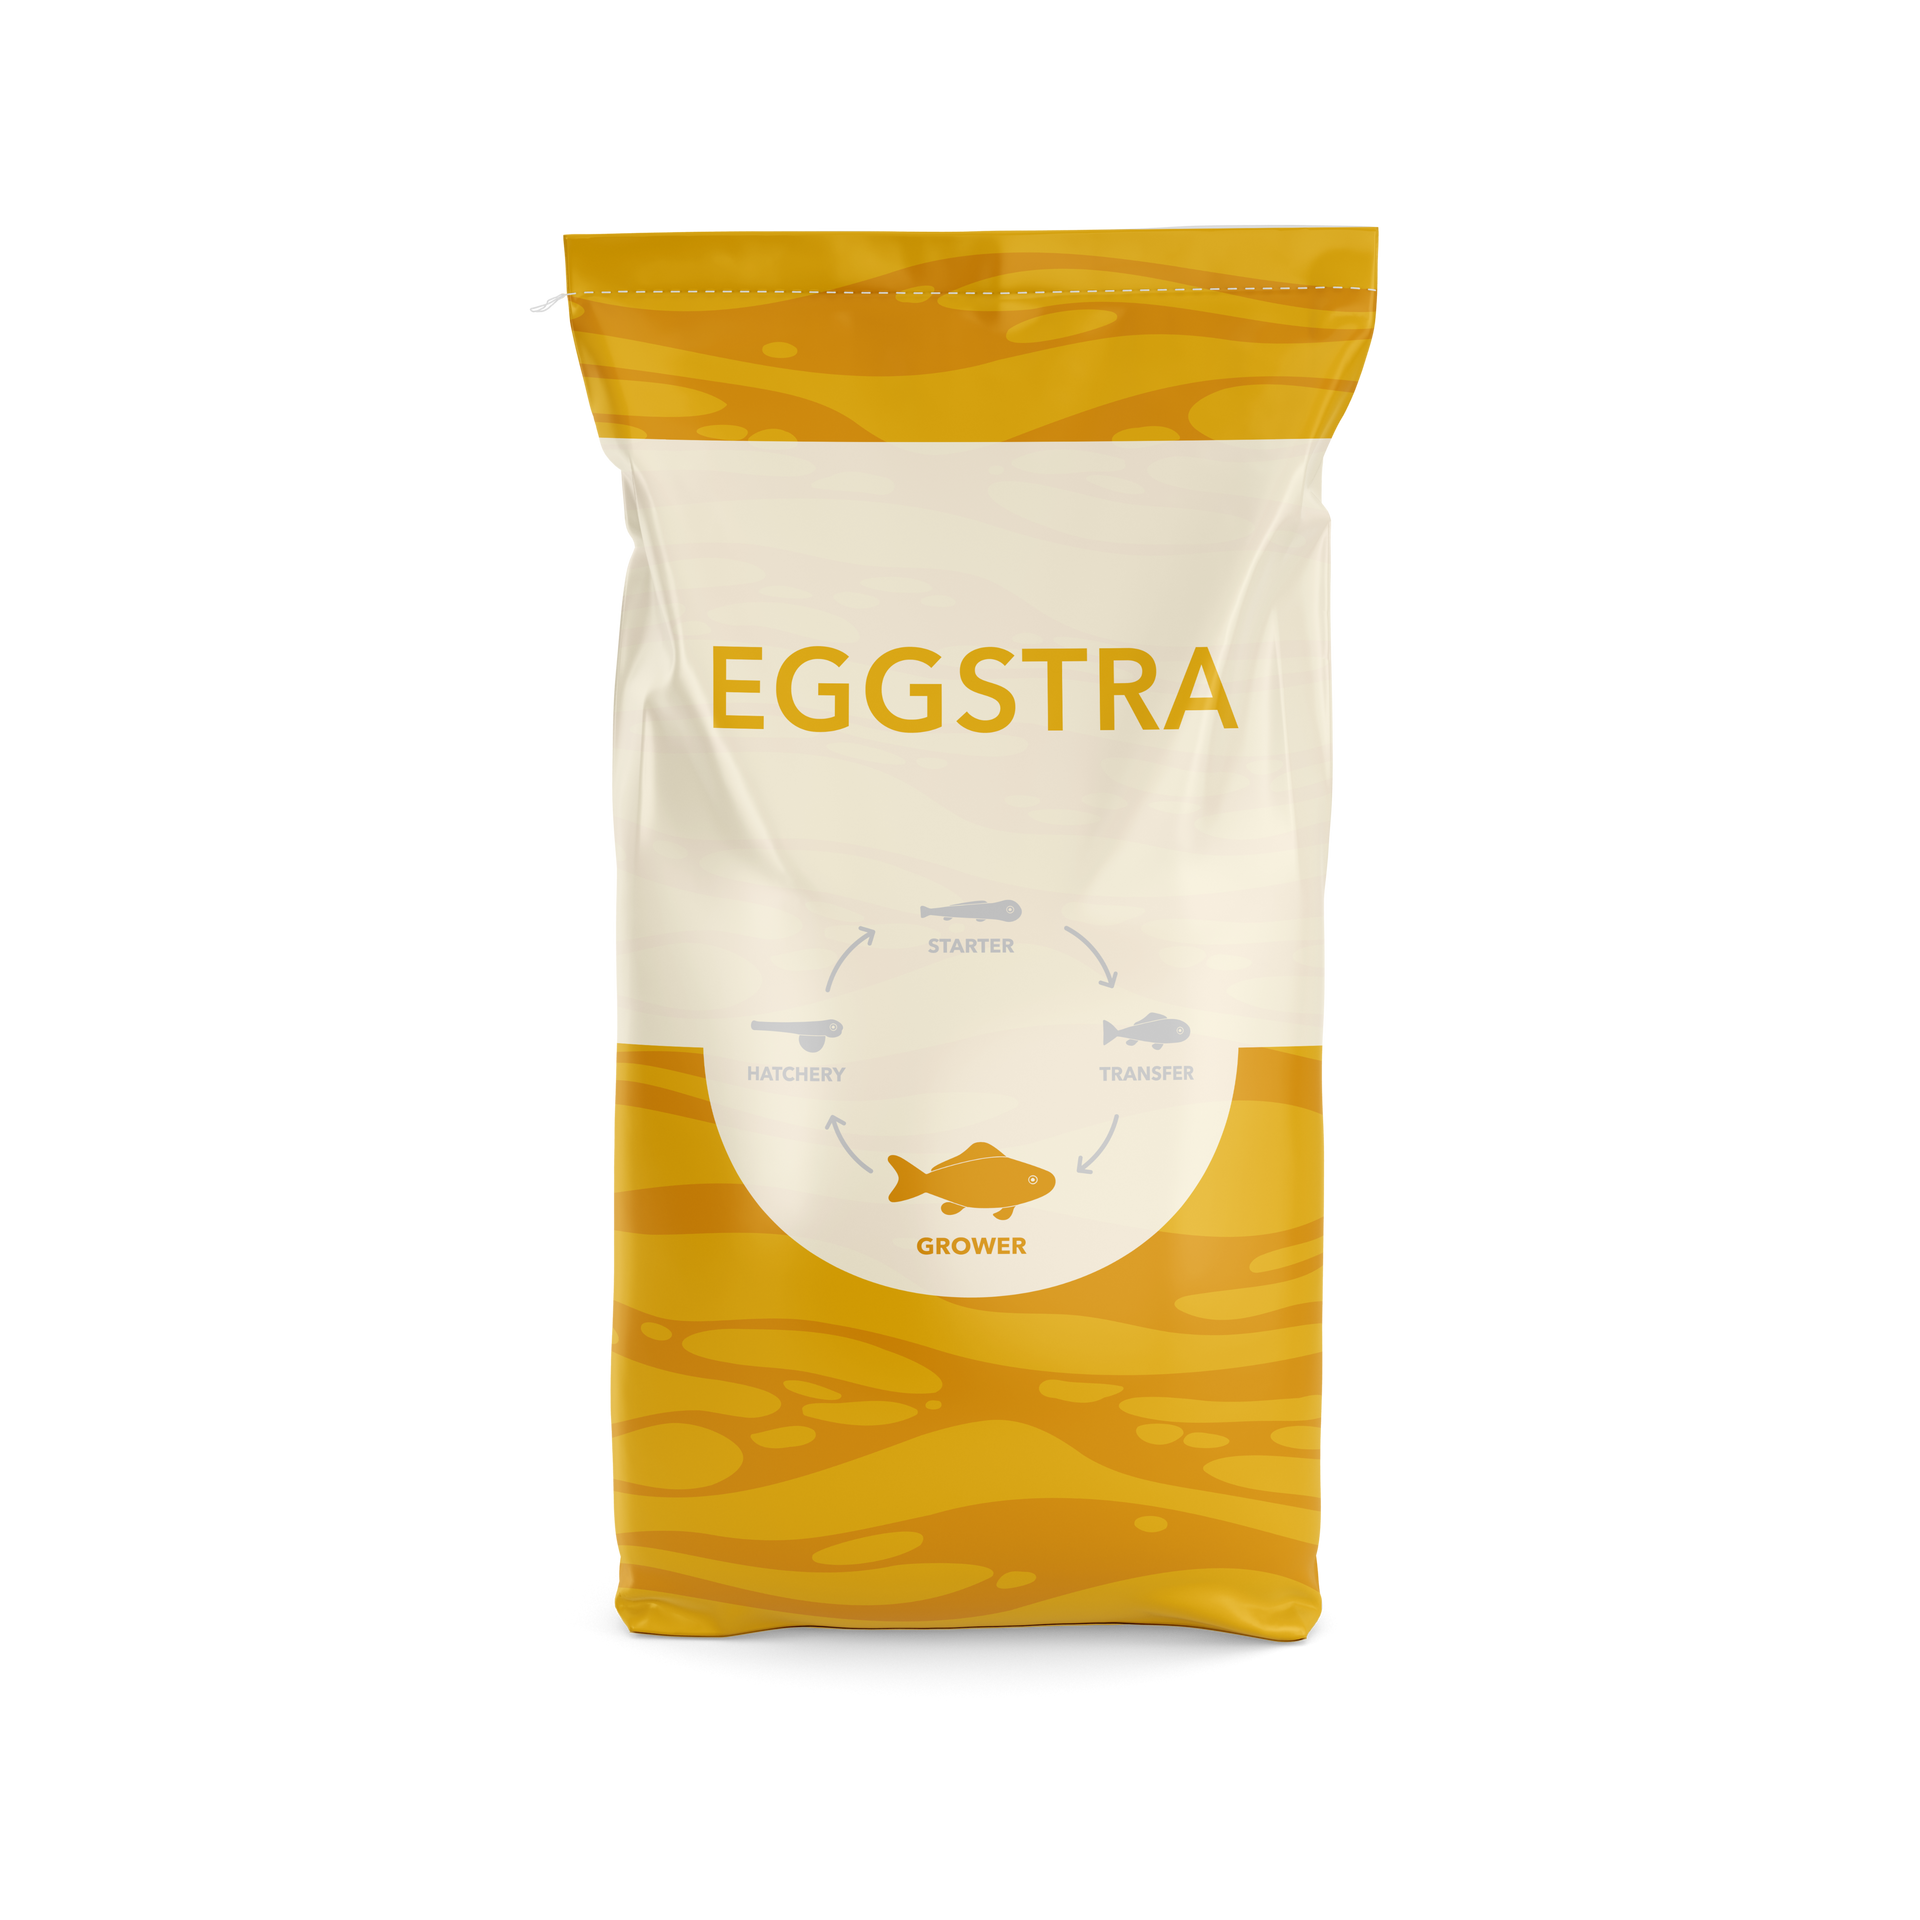 Eggstra finisher feed for trout